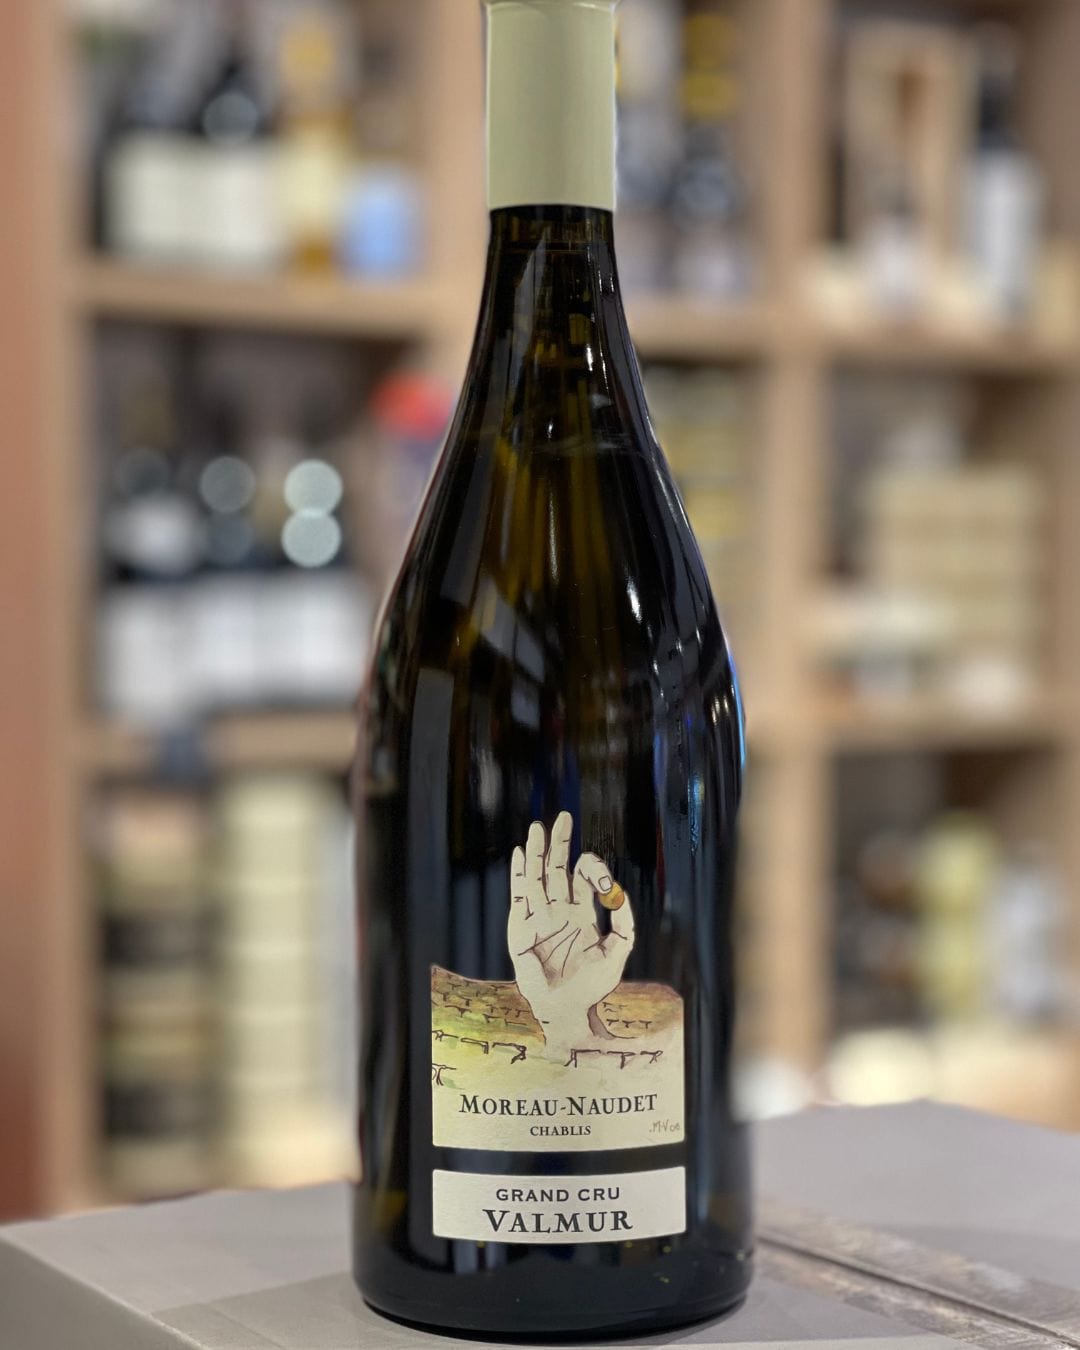 Shop Domaine Moreau-Naudet Domaine Moreau-Naudet Chablis Grand Cru Valmur 2018 online at PENTICTON artisanal French wine store in Hong Kong. Discover other French wines, promotions, workshops and featured offers at pentictonpacific.com 